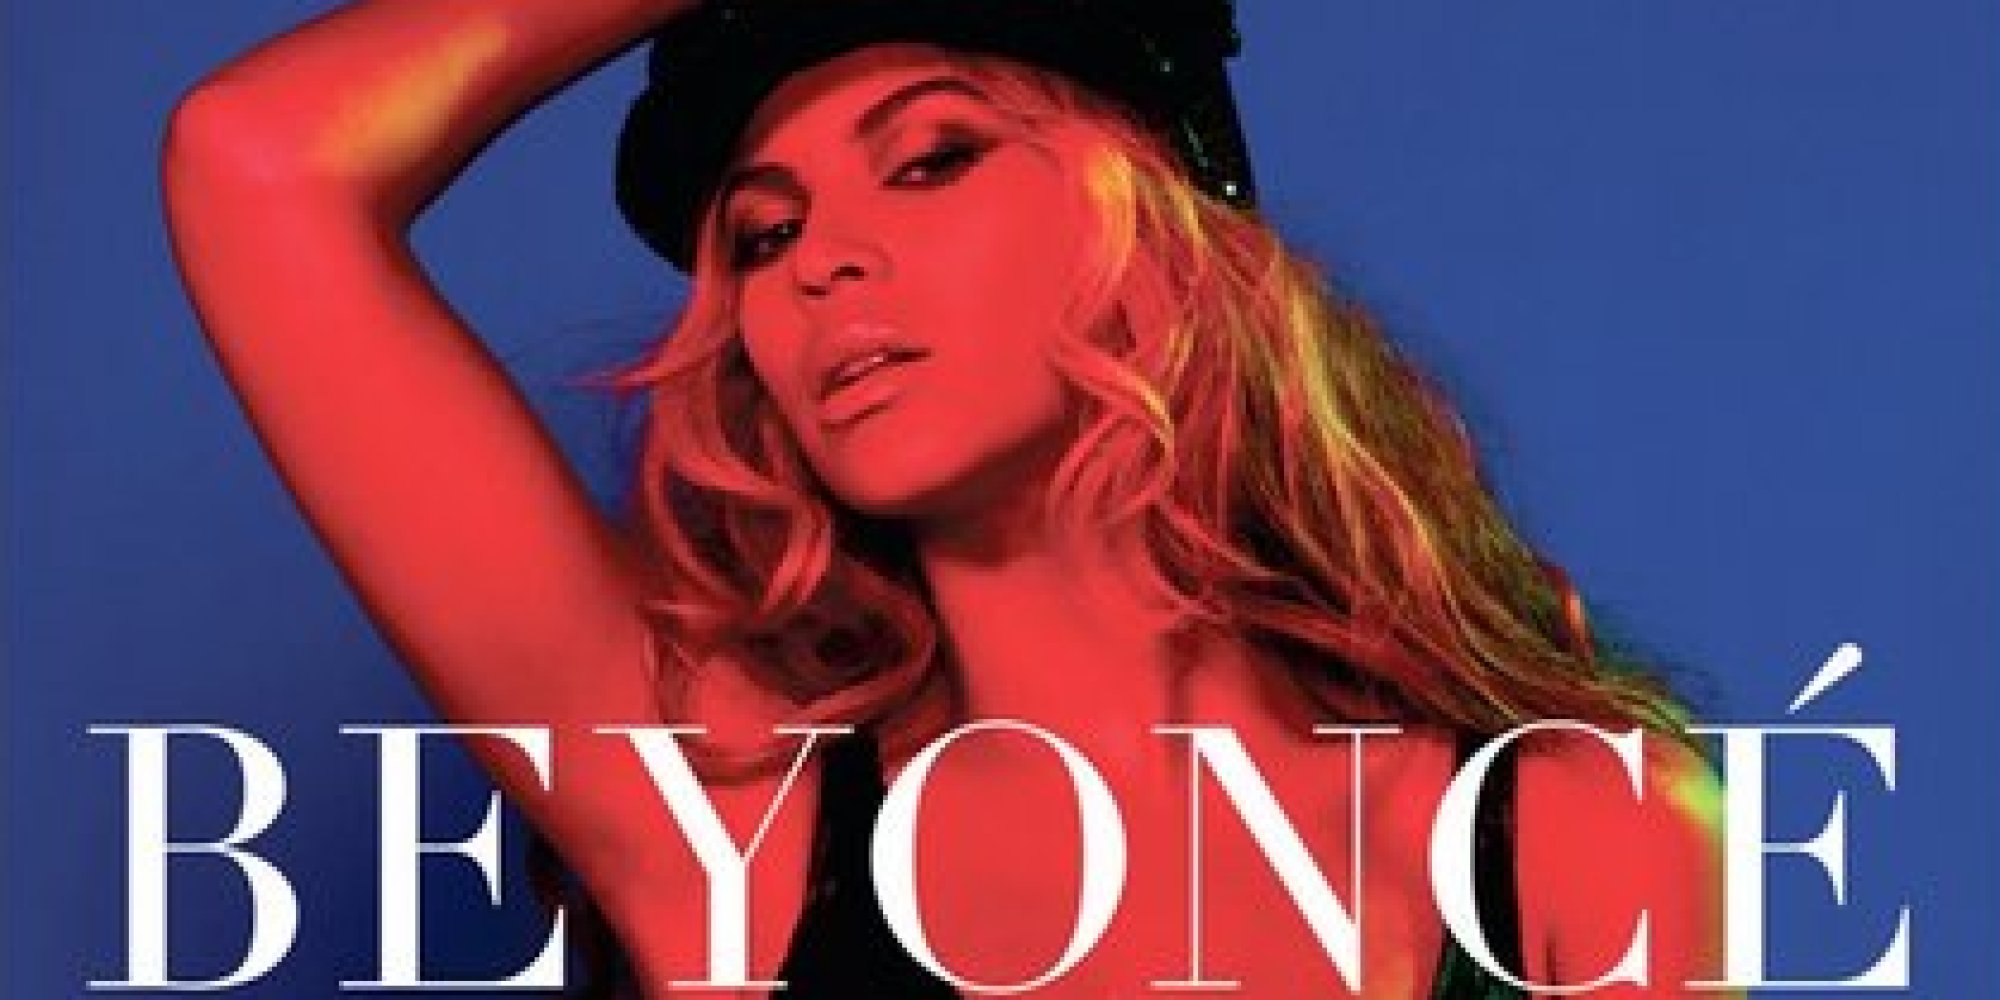 Beyonce Calendar 2014 Is Now Available For All The Single Ladies HuffPost